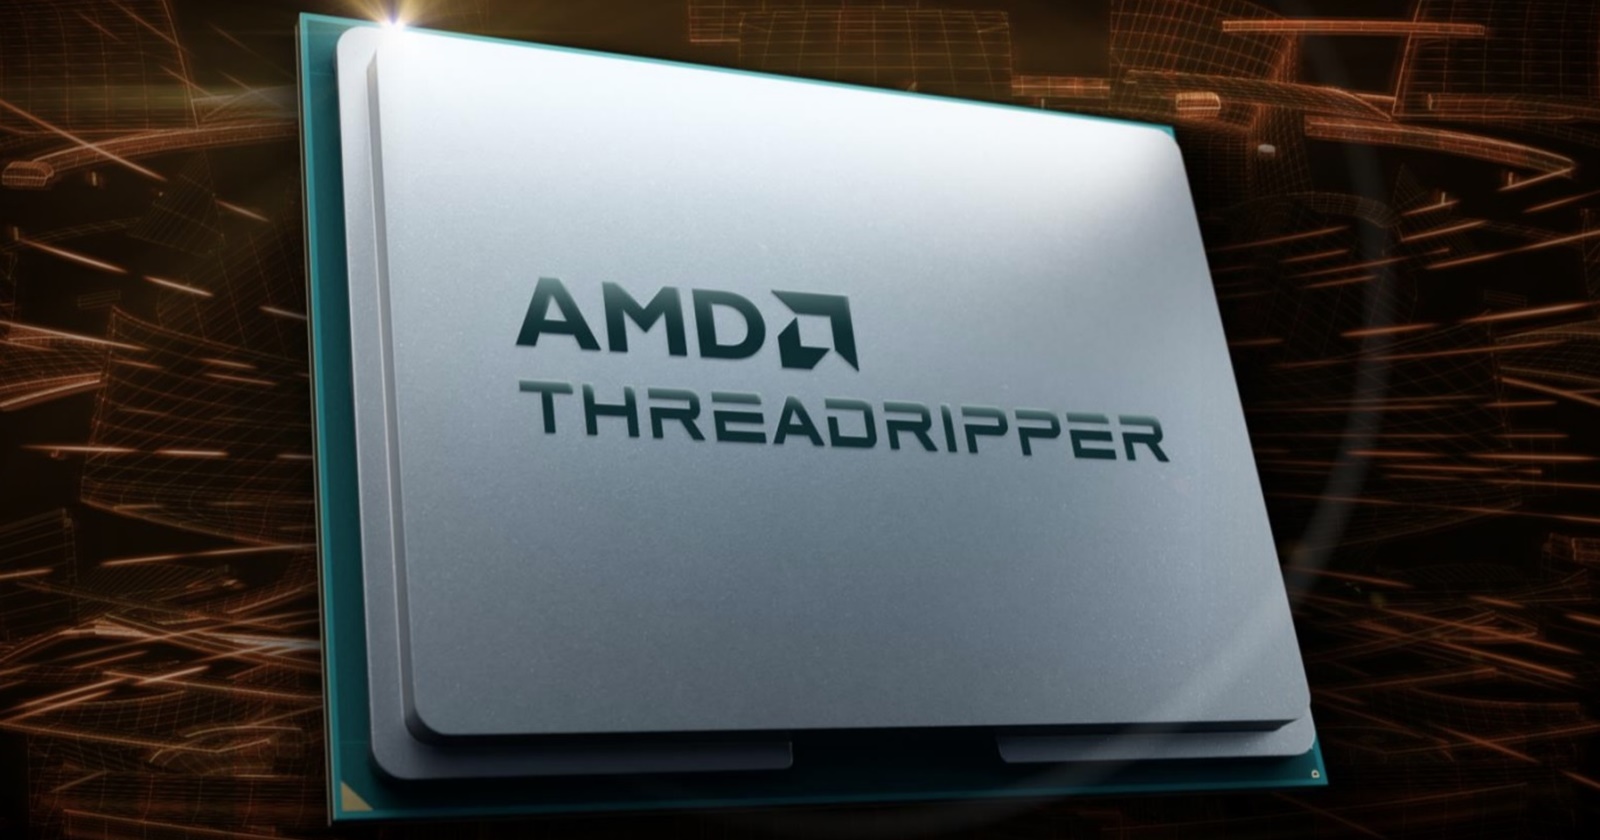 AMD Threadripper 7000 series announced with 96 cores for $4999